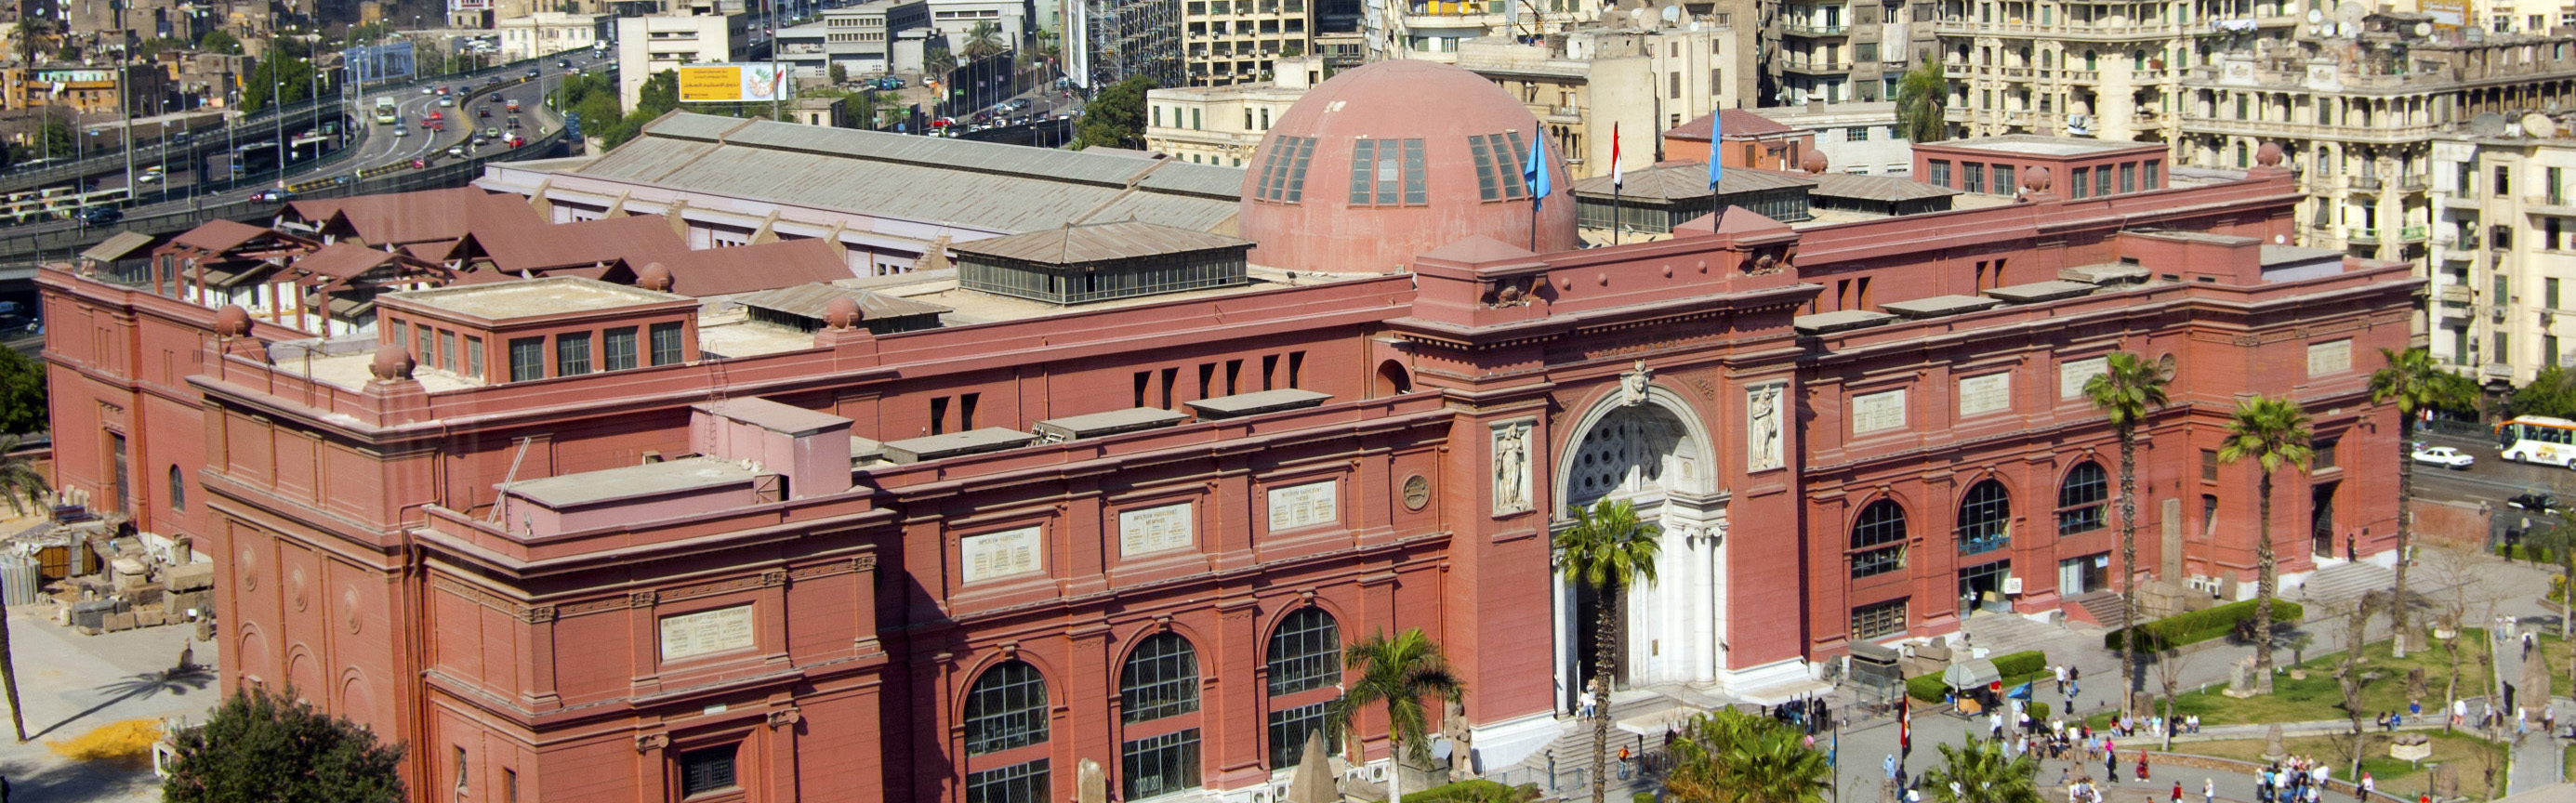 The Museum of Egyptian Antiquities - Egyptian Museum or Museum of Cairo, in Cairo, Egypt (1)